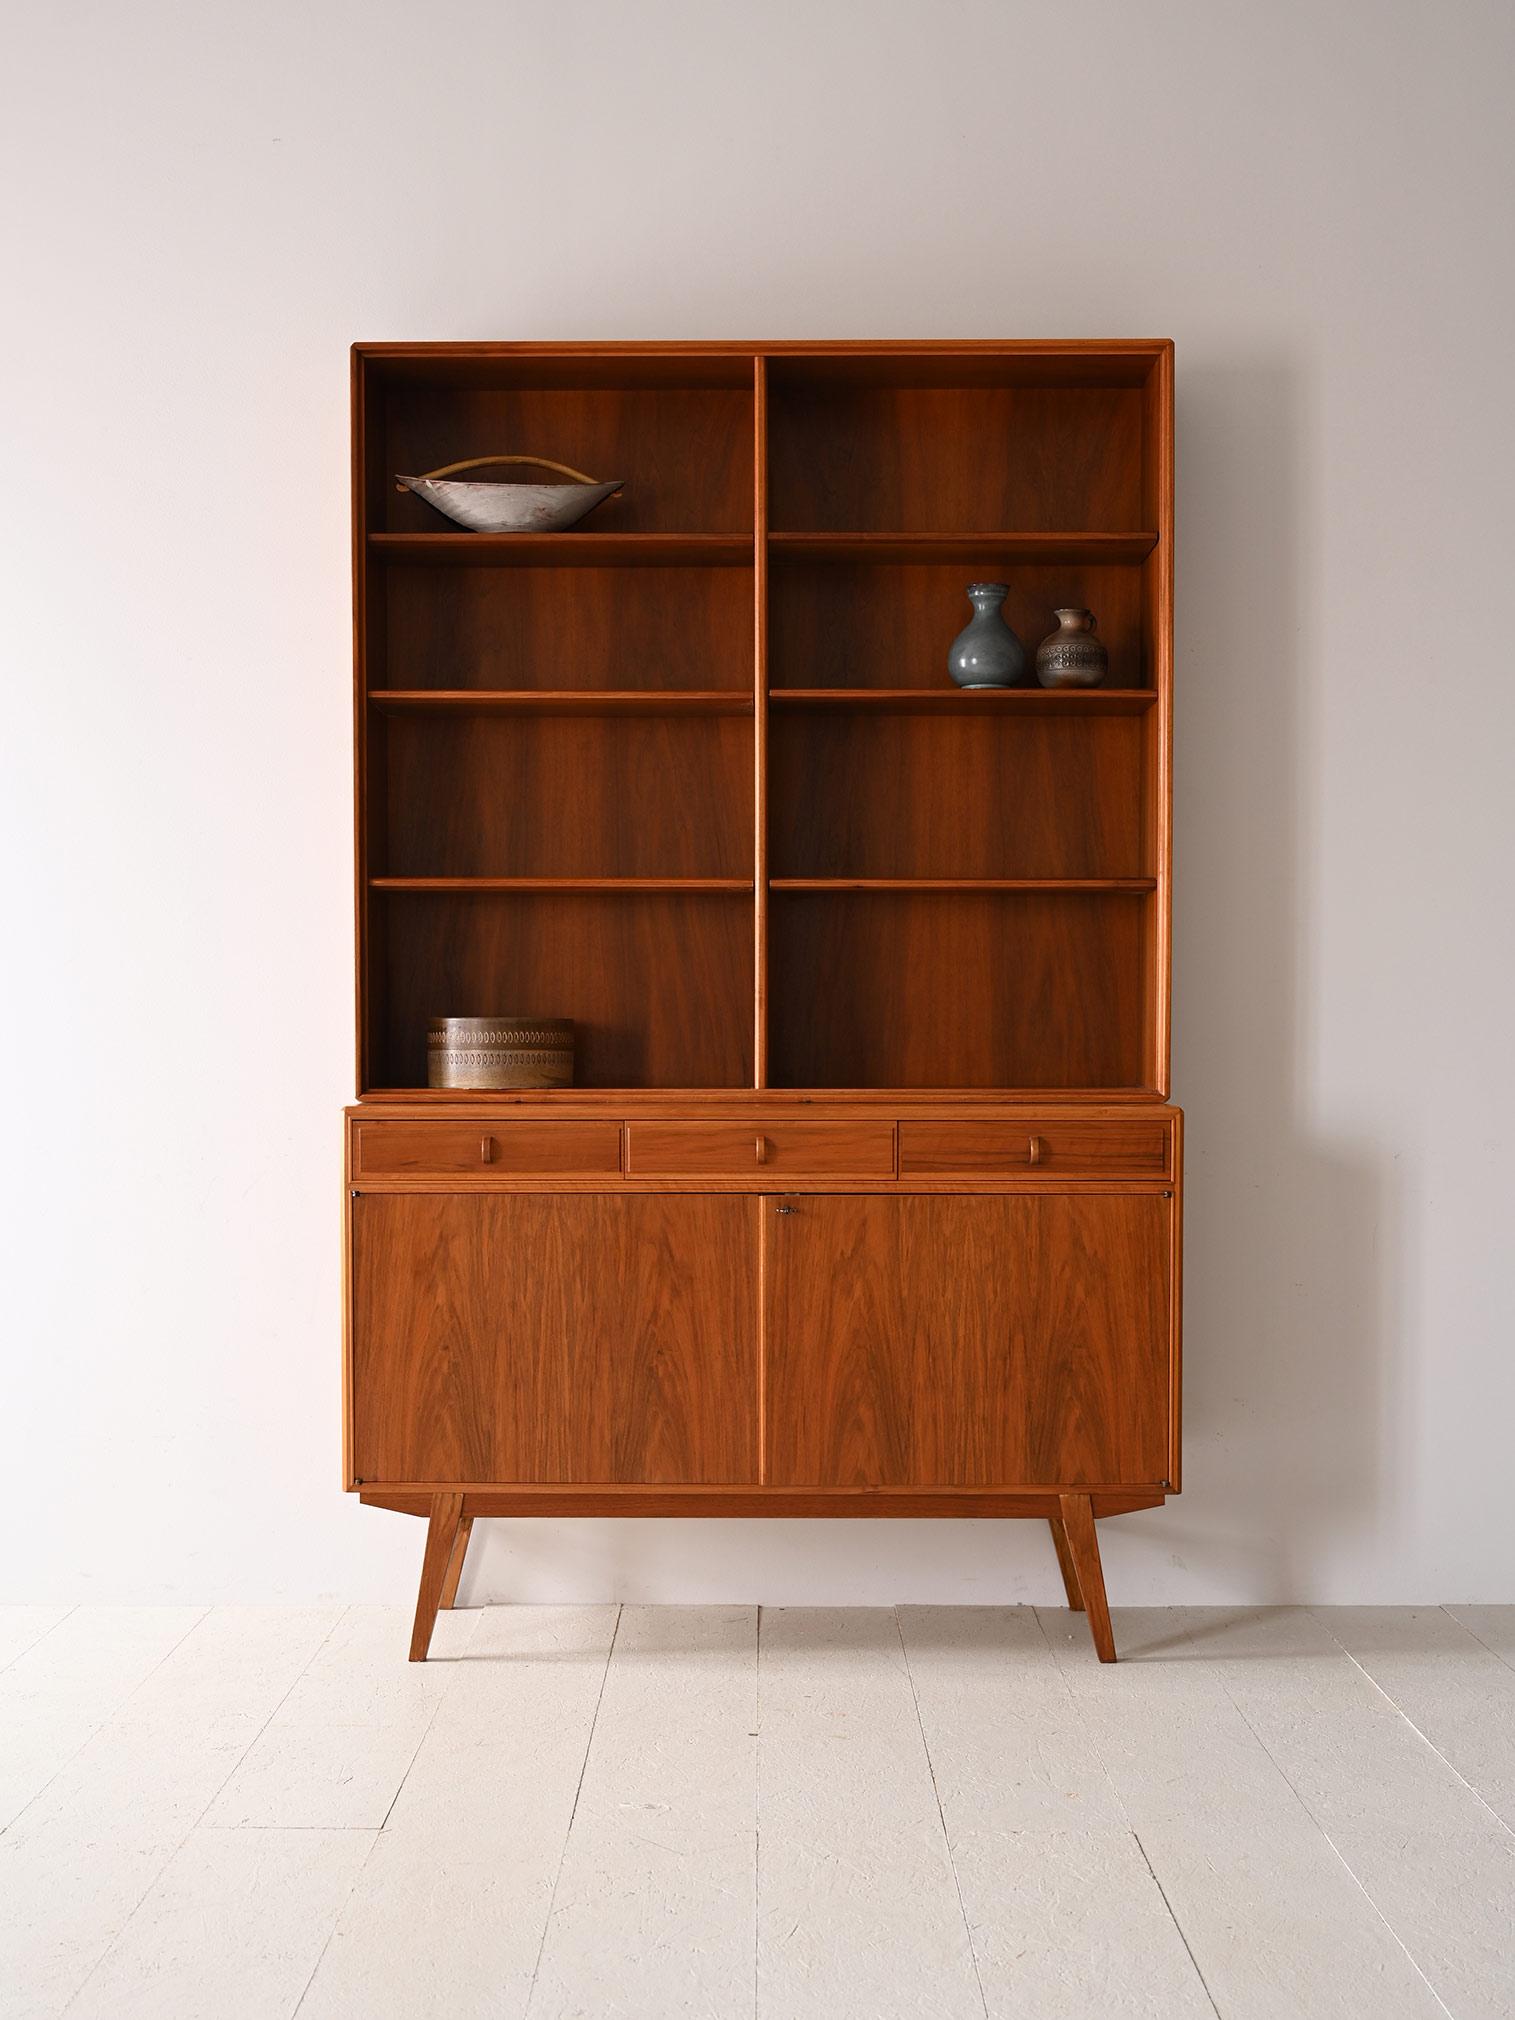 This Scandinavian bookcase from the 1960s is a masterpiece of design and functionality. With top shelves for displaying books and art objects, it is complemented by drawers and doors that offer elegant and discreet storage solutions. The teak